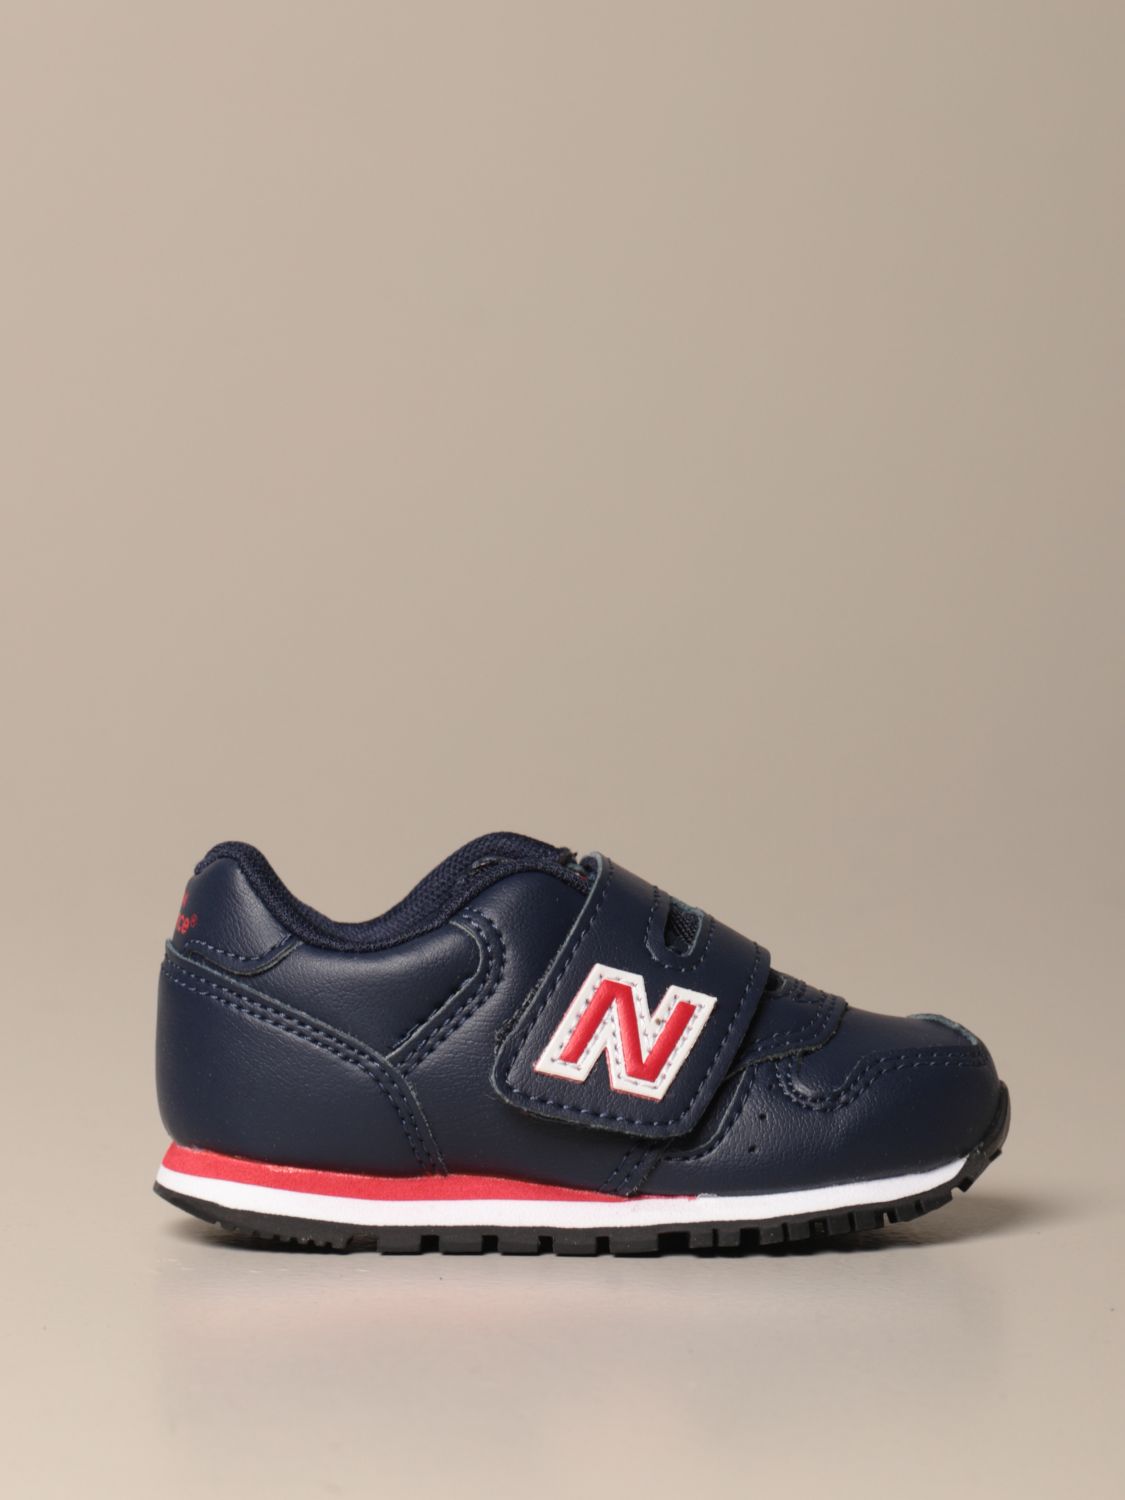 New Balance Outlet: Chaussures enfant | Chaussures New Balance ...